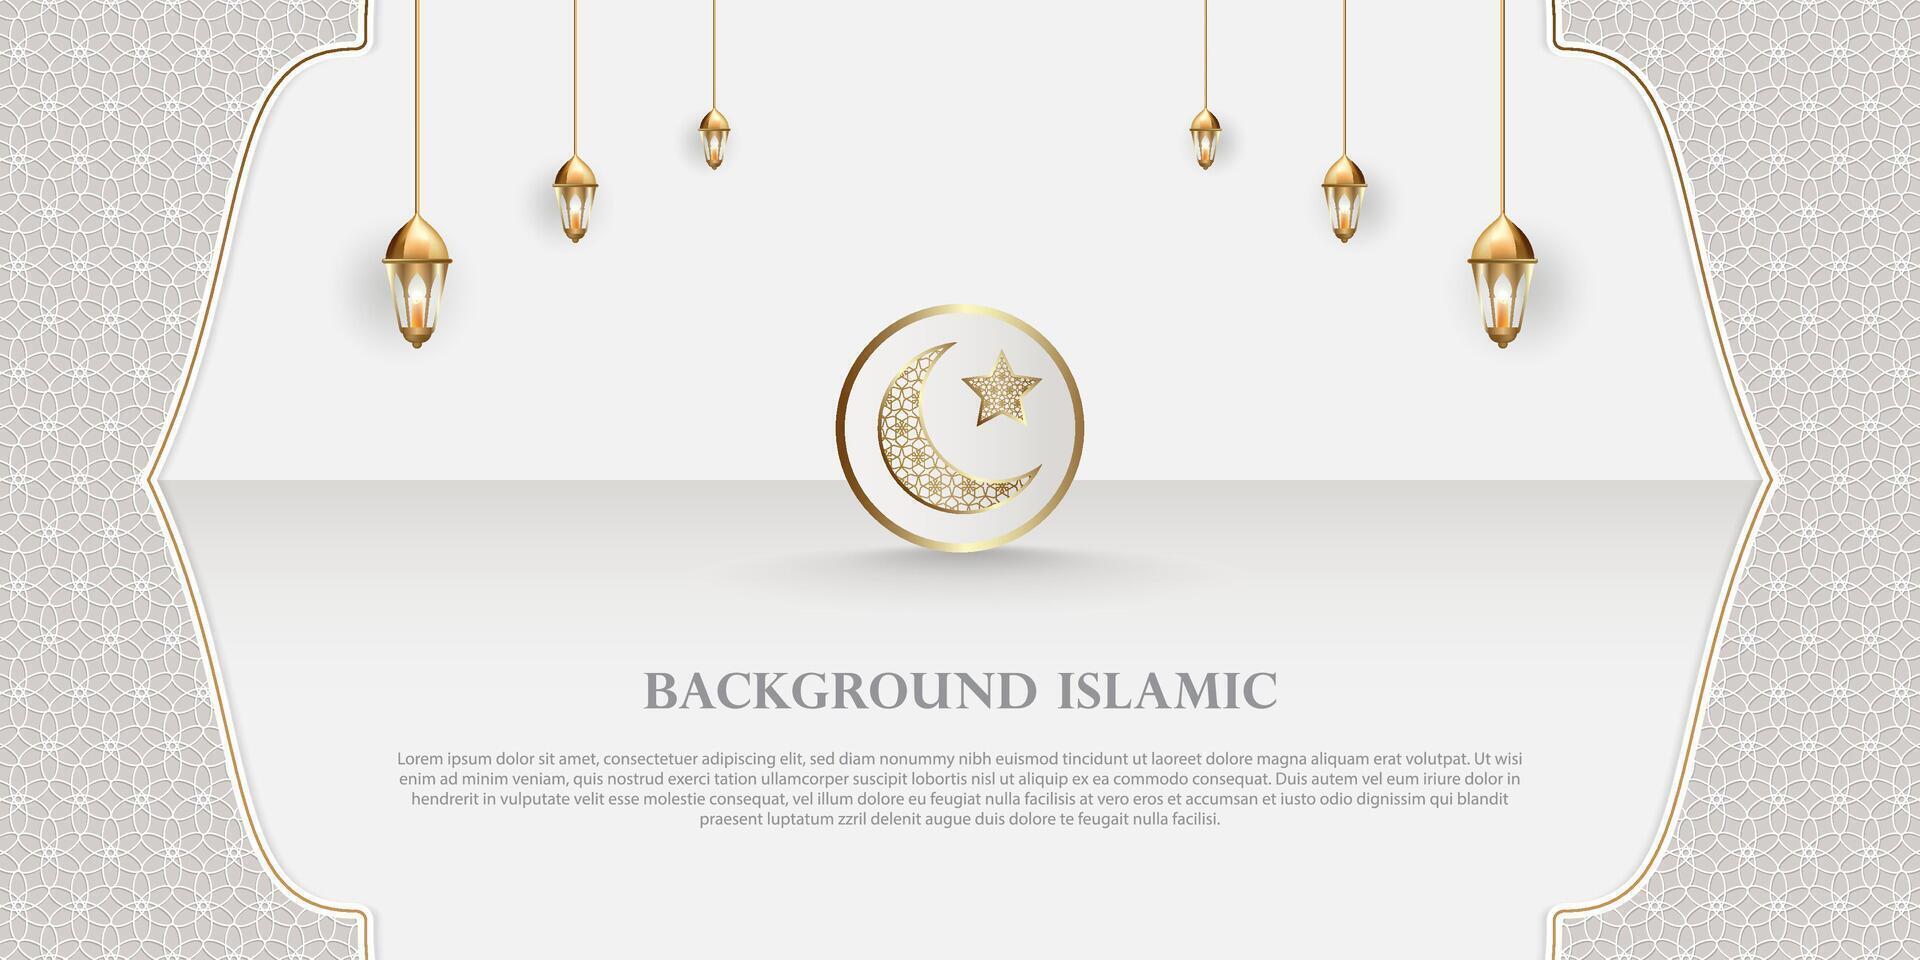 Islamic theme banner background, Arabic pattern ornaments. White color with luxurious gold silhouette. Decoration design element vector